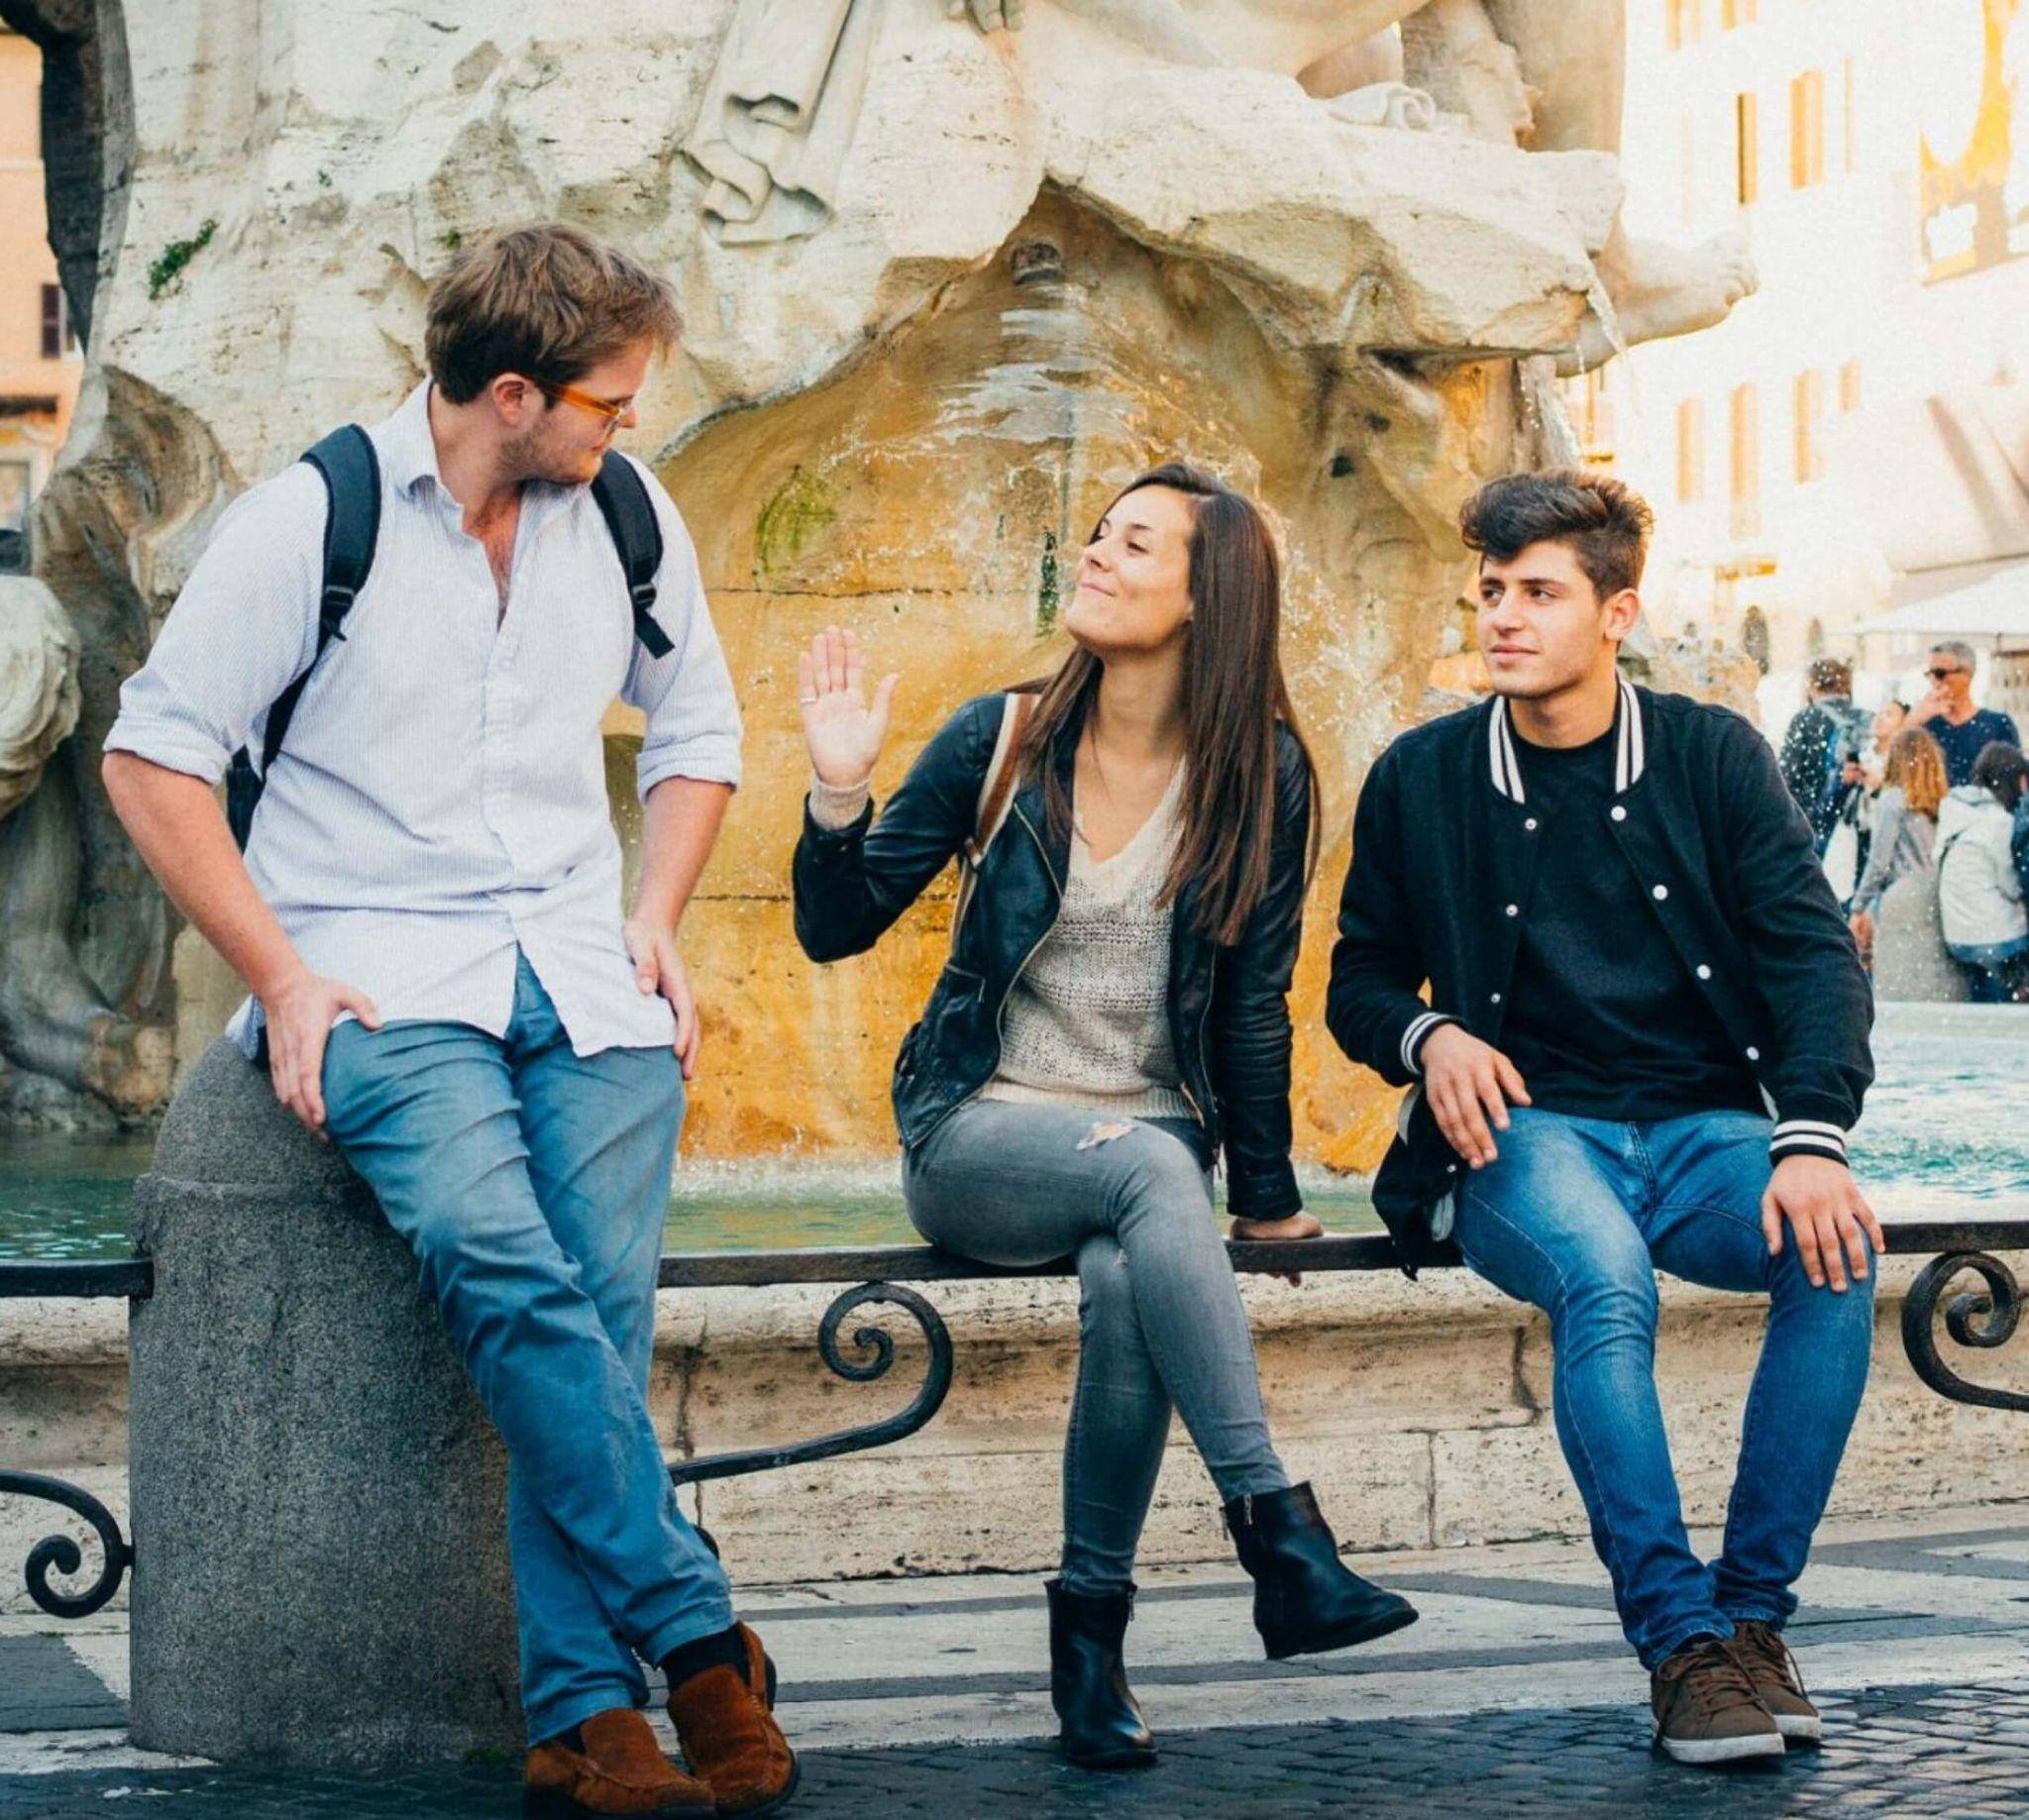 A trio of graduate studies students enjoying summer in the center of Rome